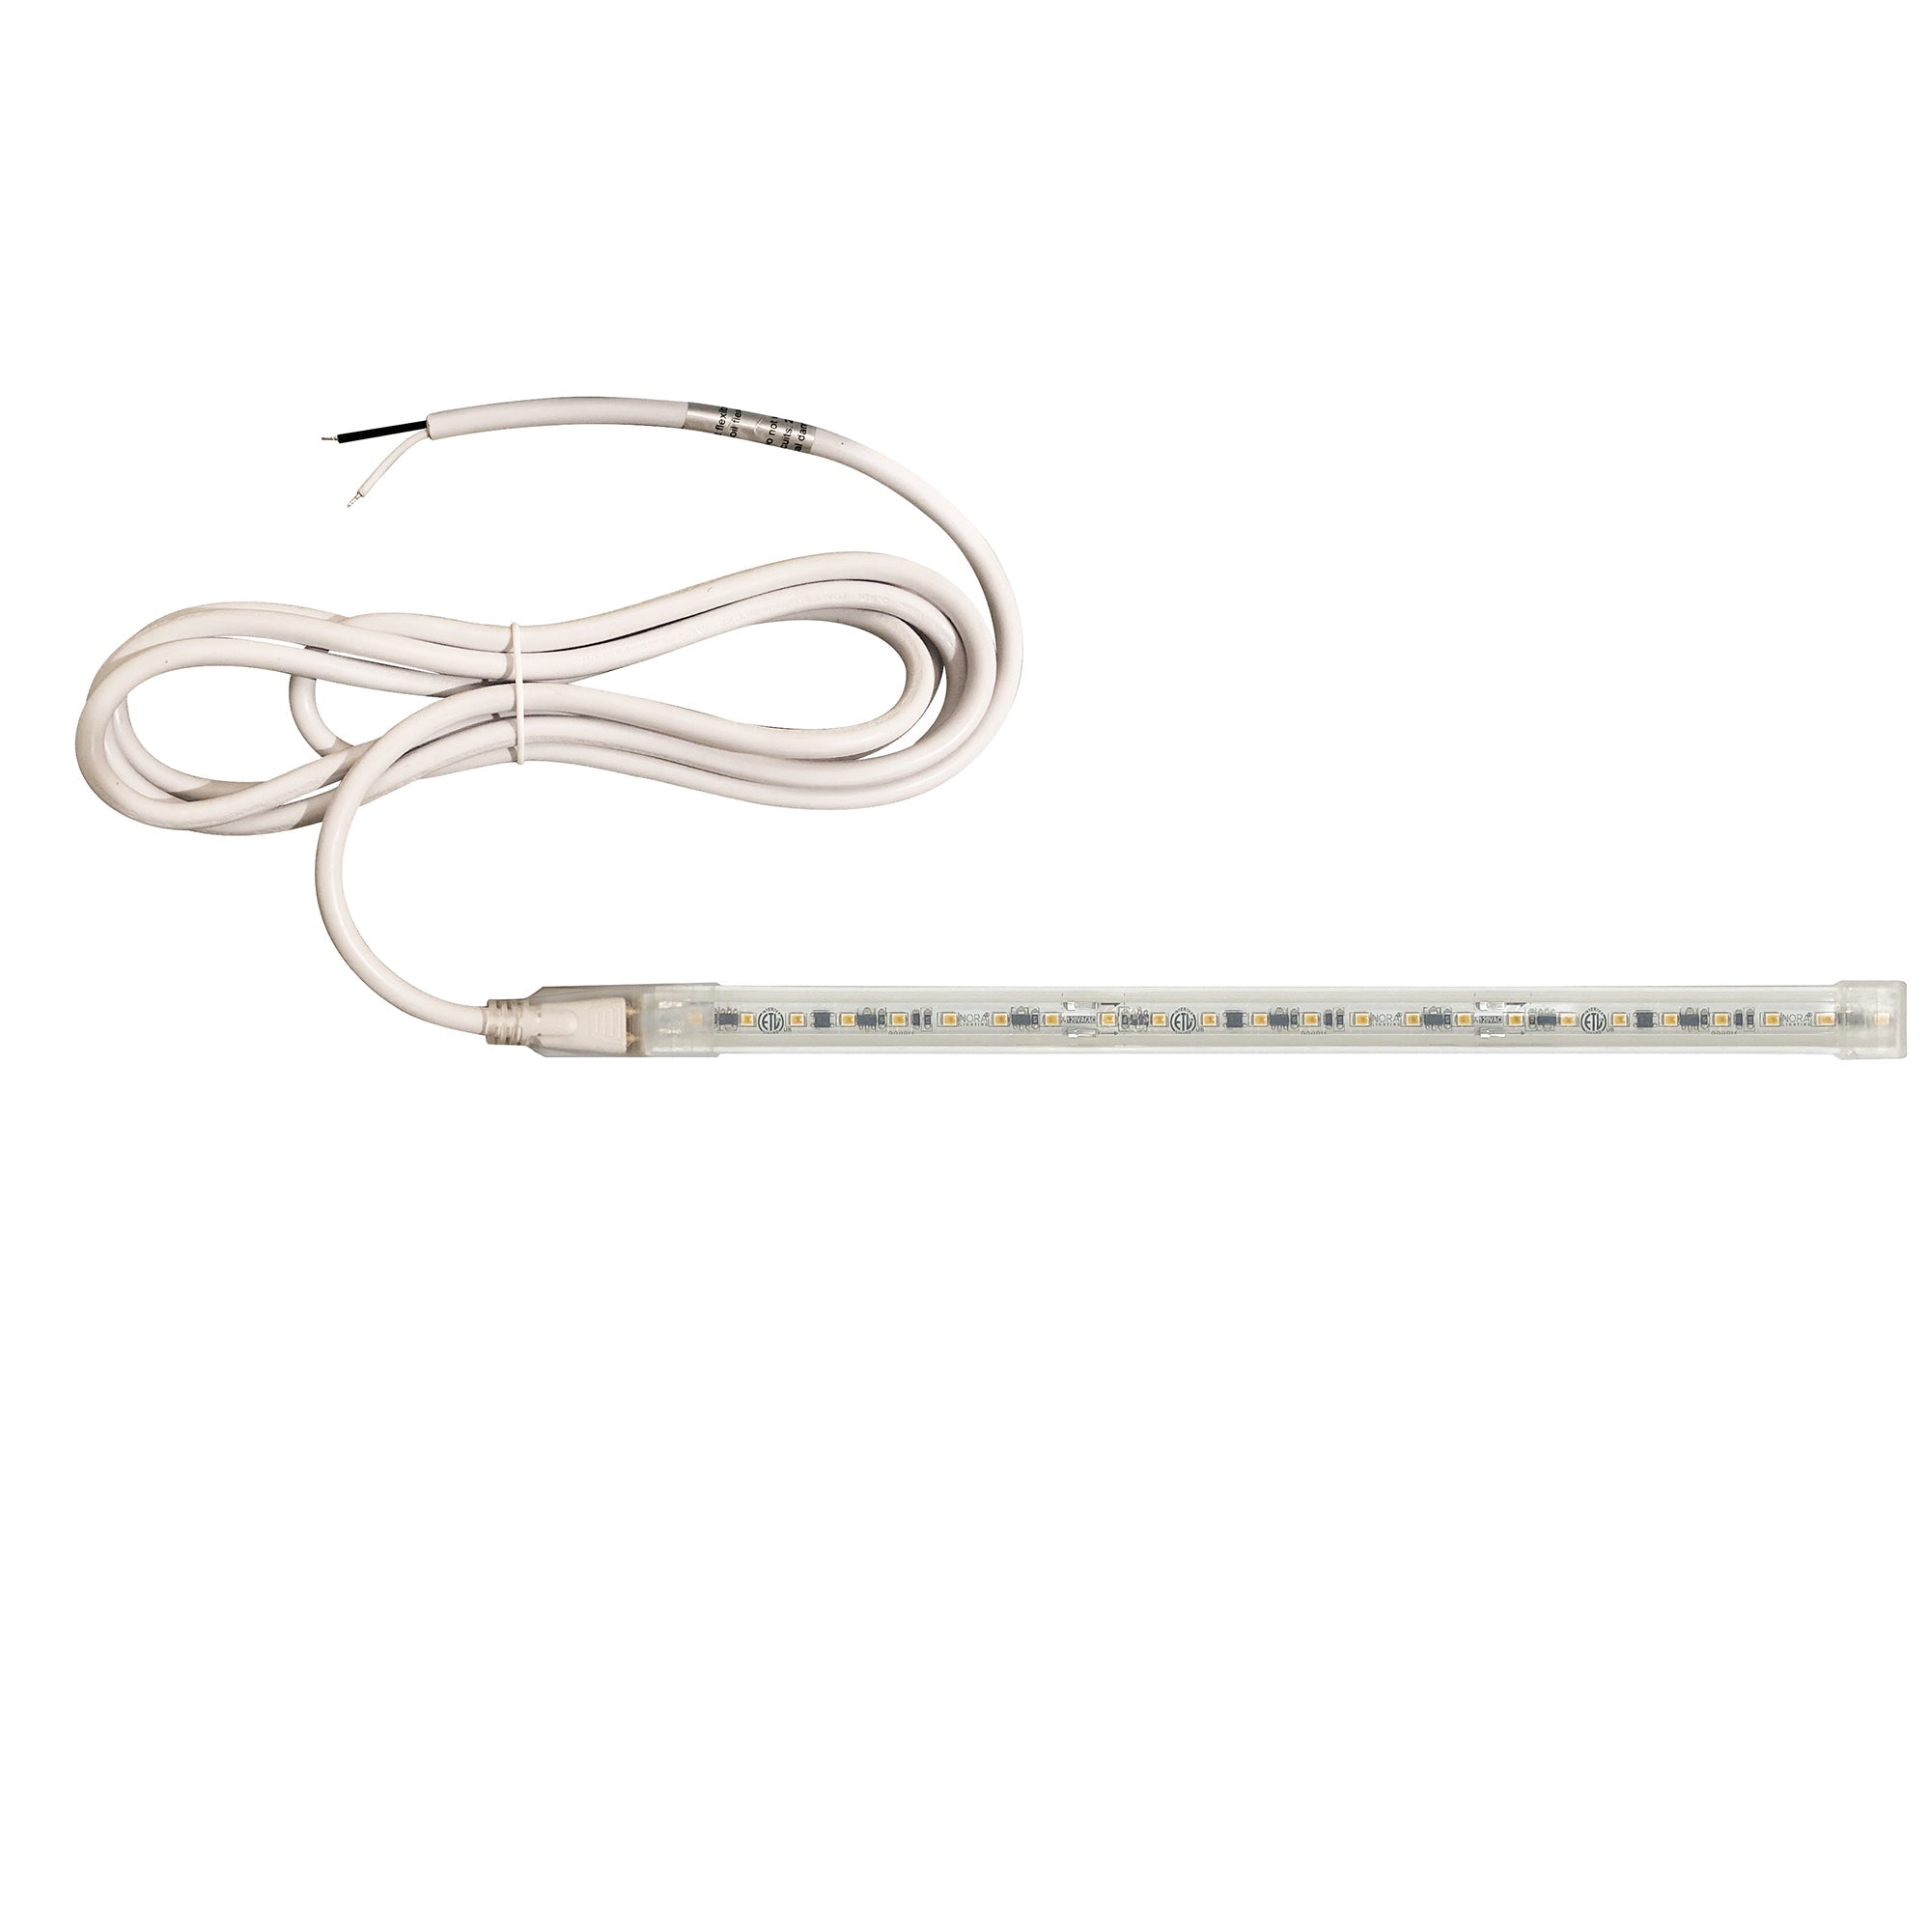 Nora Lighting NUTP13-W6-4-12-927/HW - Accent / Undercabinet - Custom Cut 6-ft, 4-in 120V Continuous LED Tape Light, 330lm / 3.6W per foot, 2700K, w/ Mounting Clips and 8' Hardwired Power Cord